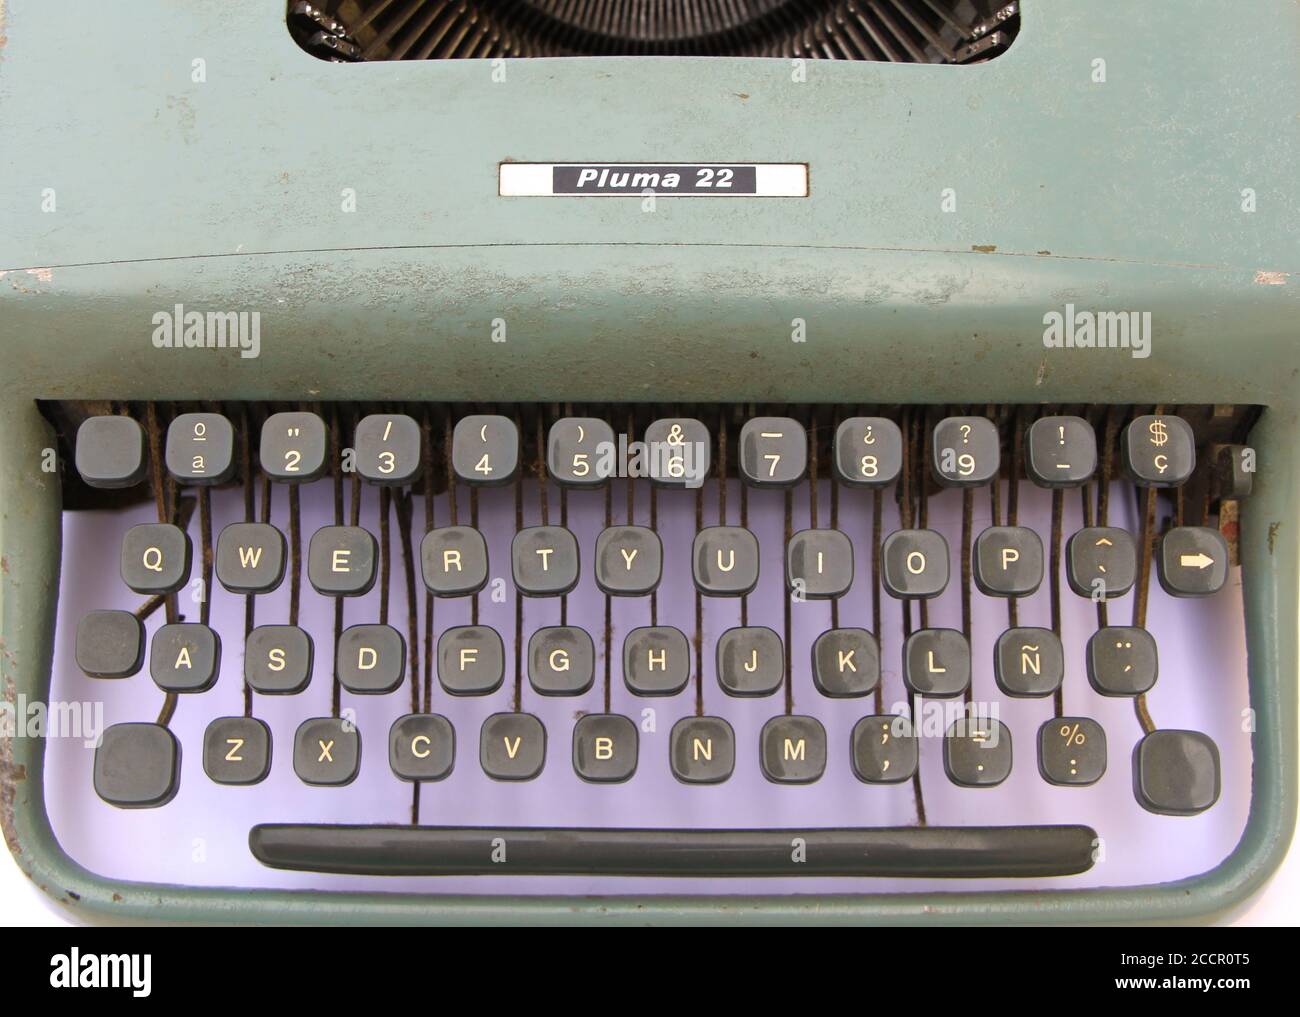 Photo of an Old Olivetti Pluma 22 mechanical qwerty typewriter in working  condition with Spanish keyboard designed by Marcello Nizzoli in1949 Stock  Photo - Alamy